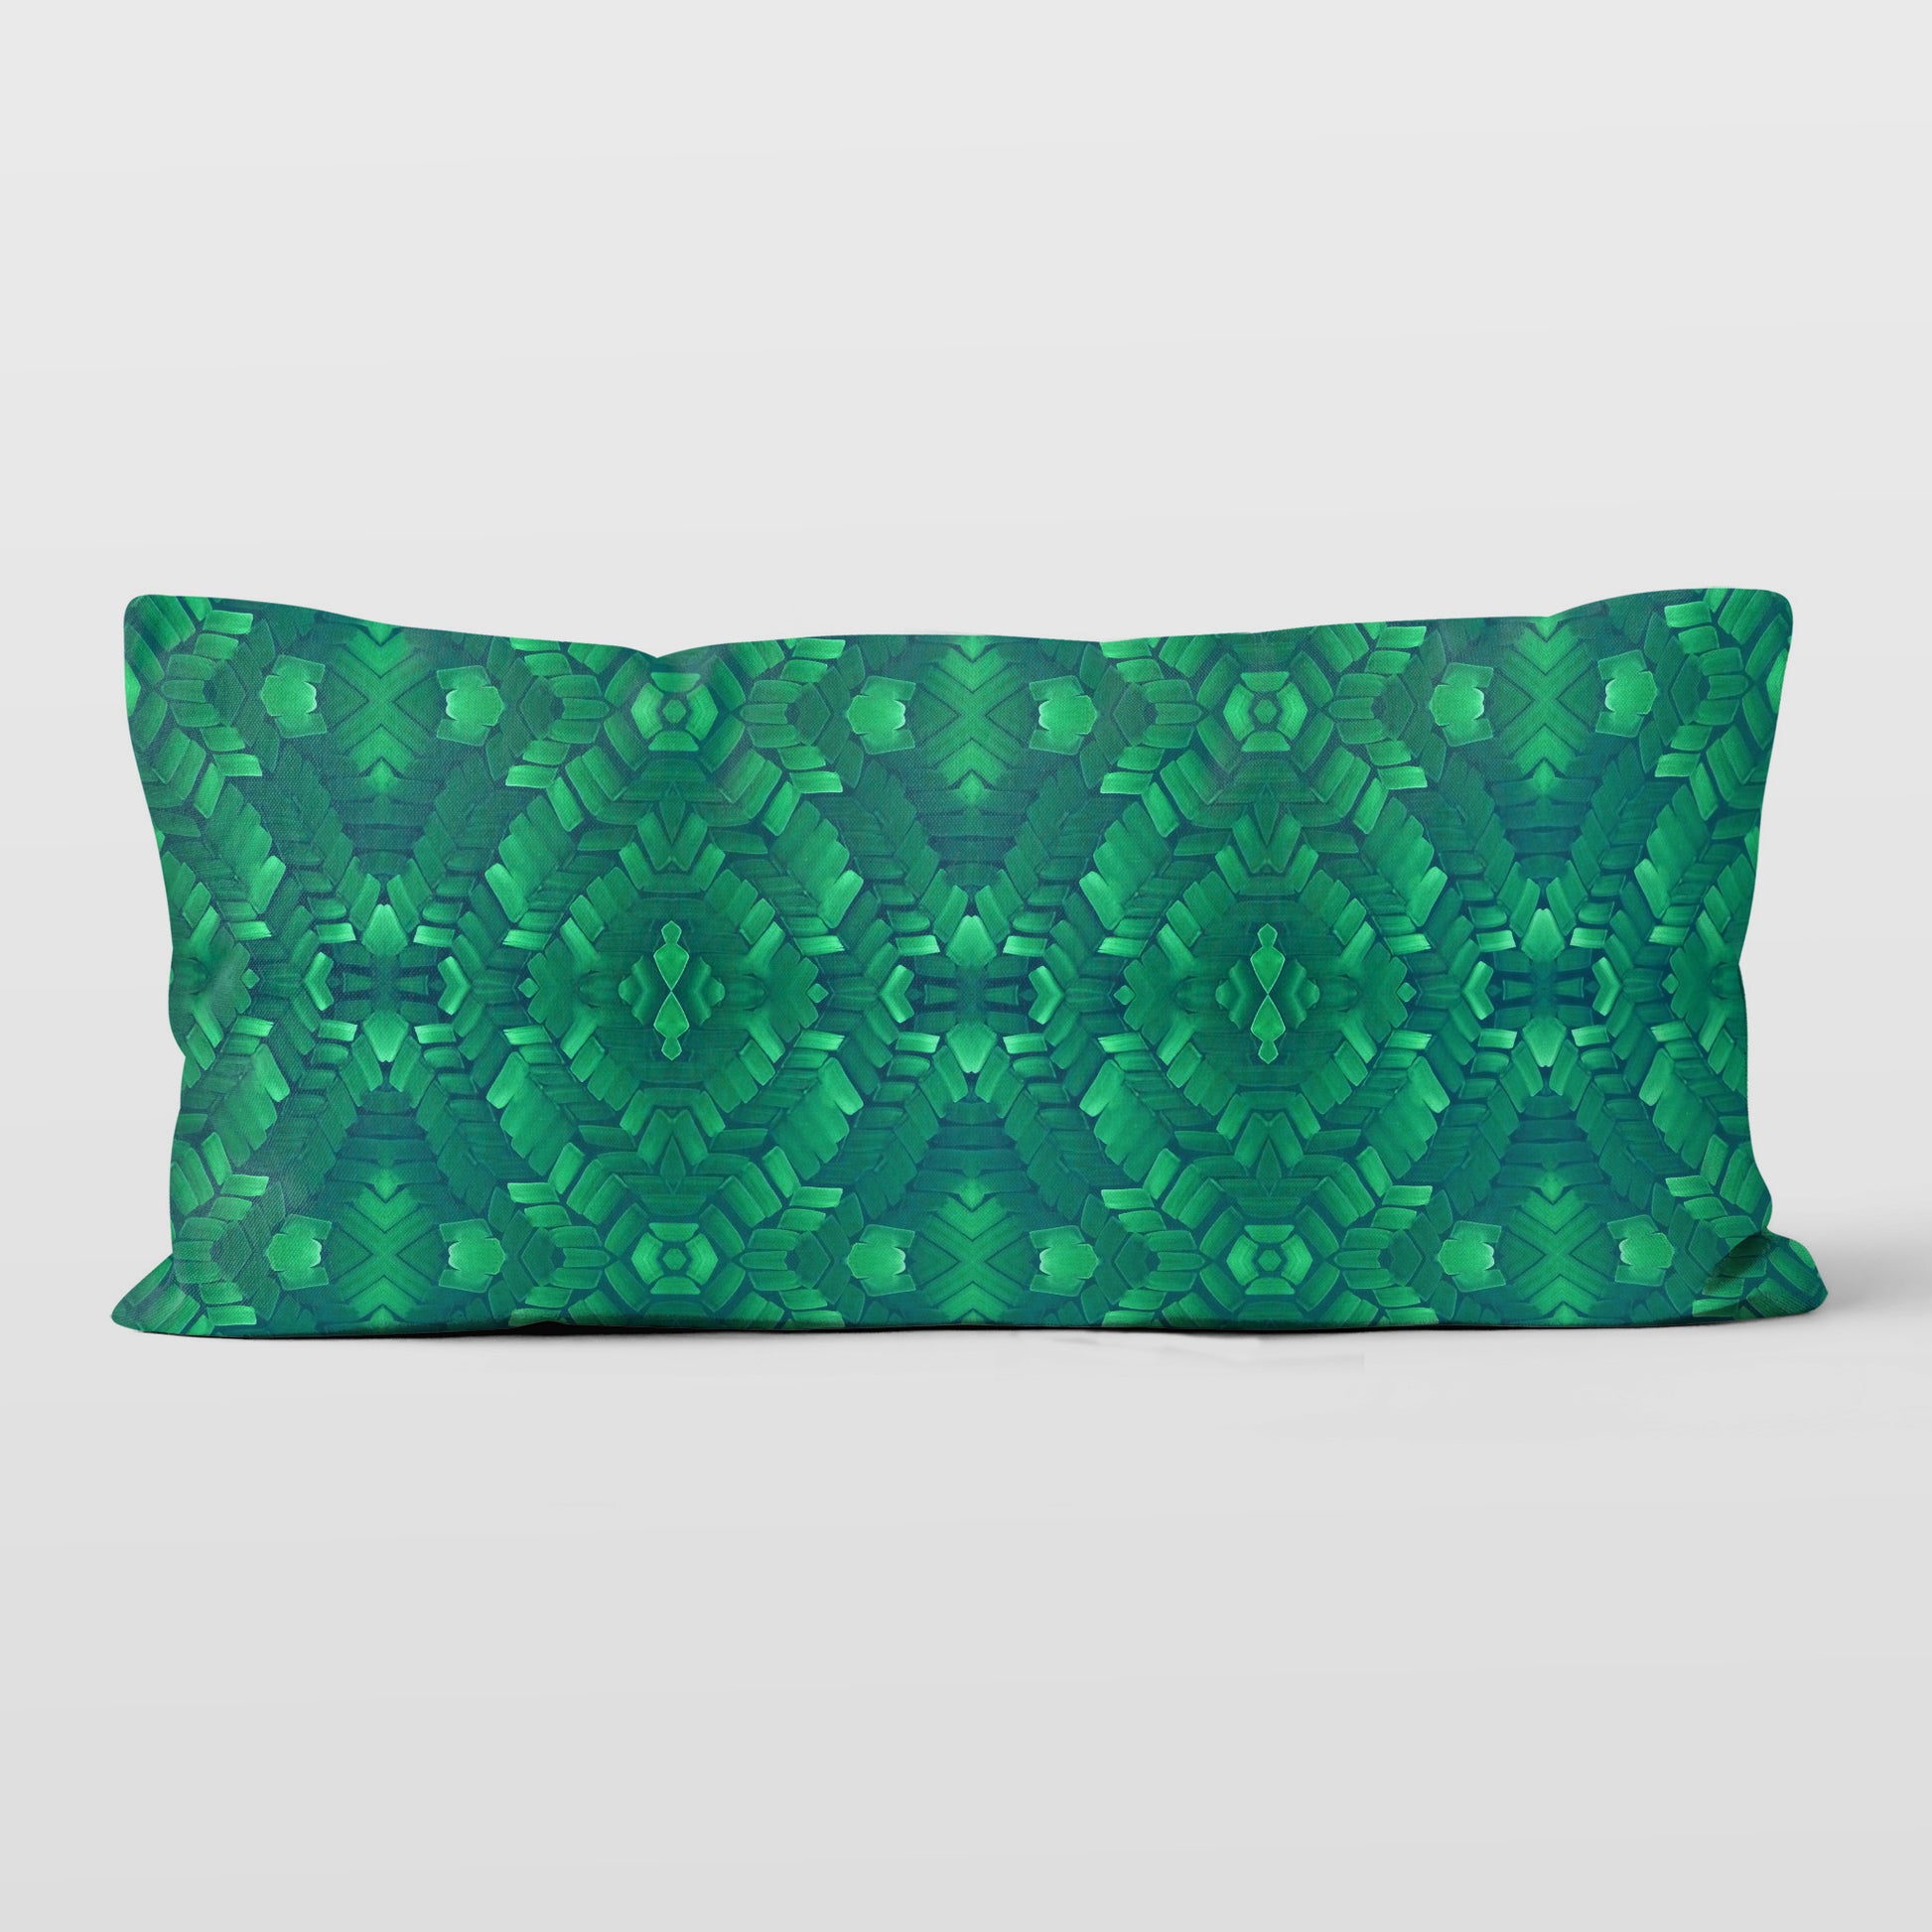 Rectangular lumbar pillow featuring a hand-painted abstract pattern in bright green.